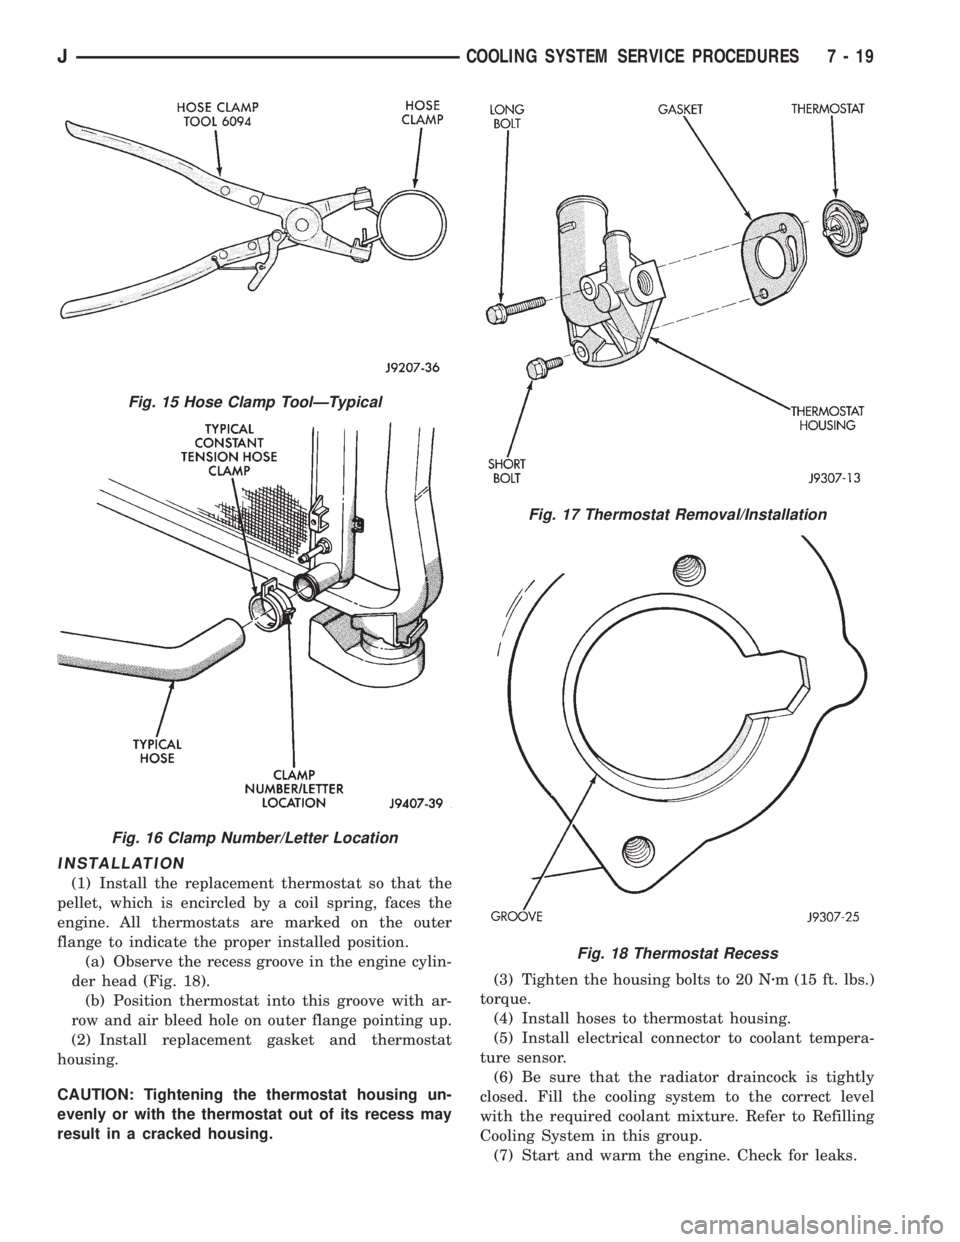 JEEP XJ 1995  Service And User Guide INSTALLATION
(1) Install the replacement thermostat so that the
pellet, which is encircled by a coil spring, faces the
engine. All thermostats are marked on the outer
flange to indicate the proper ins